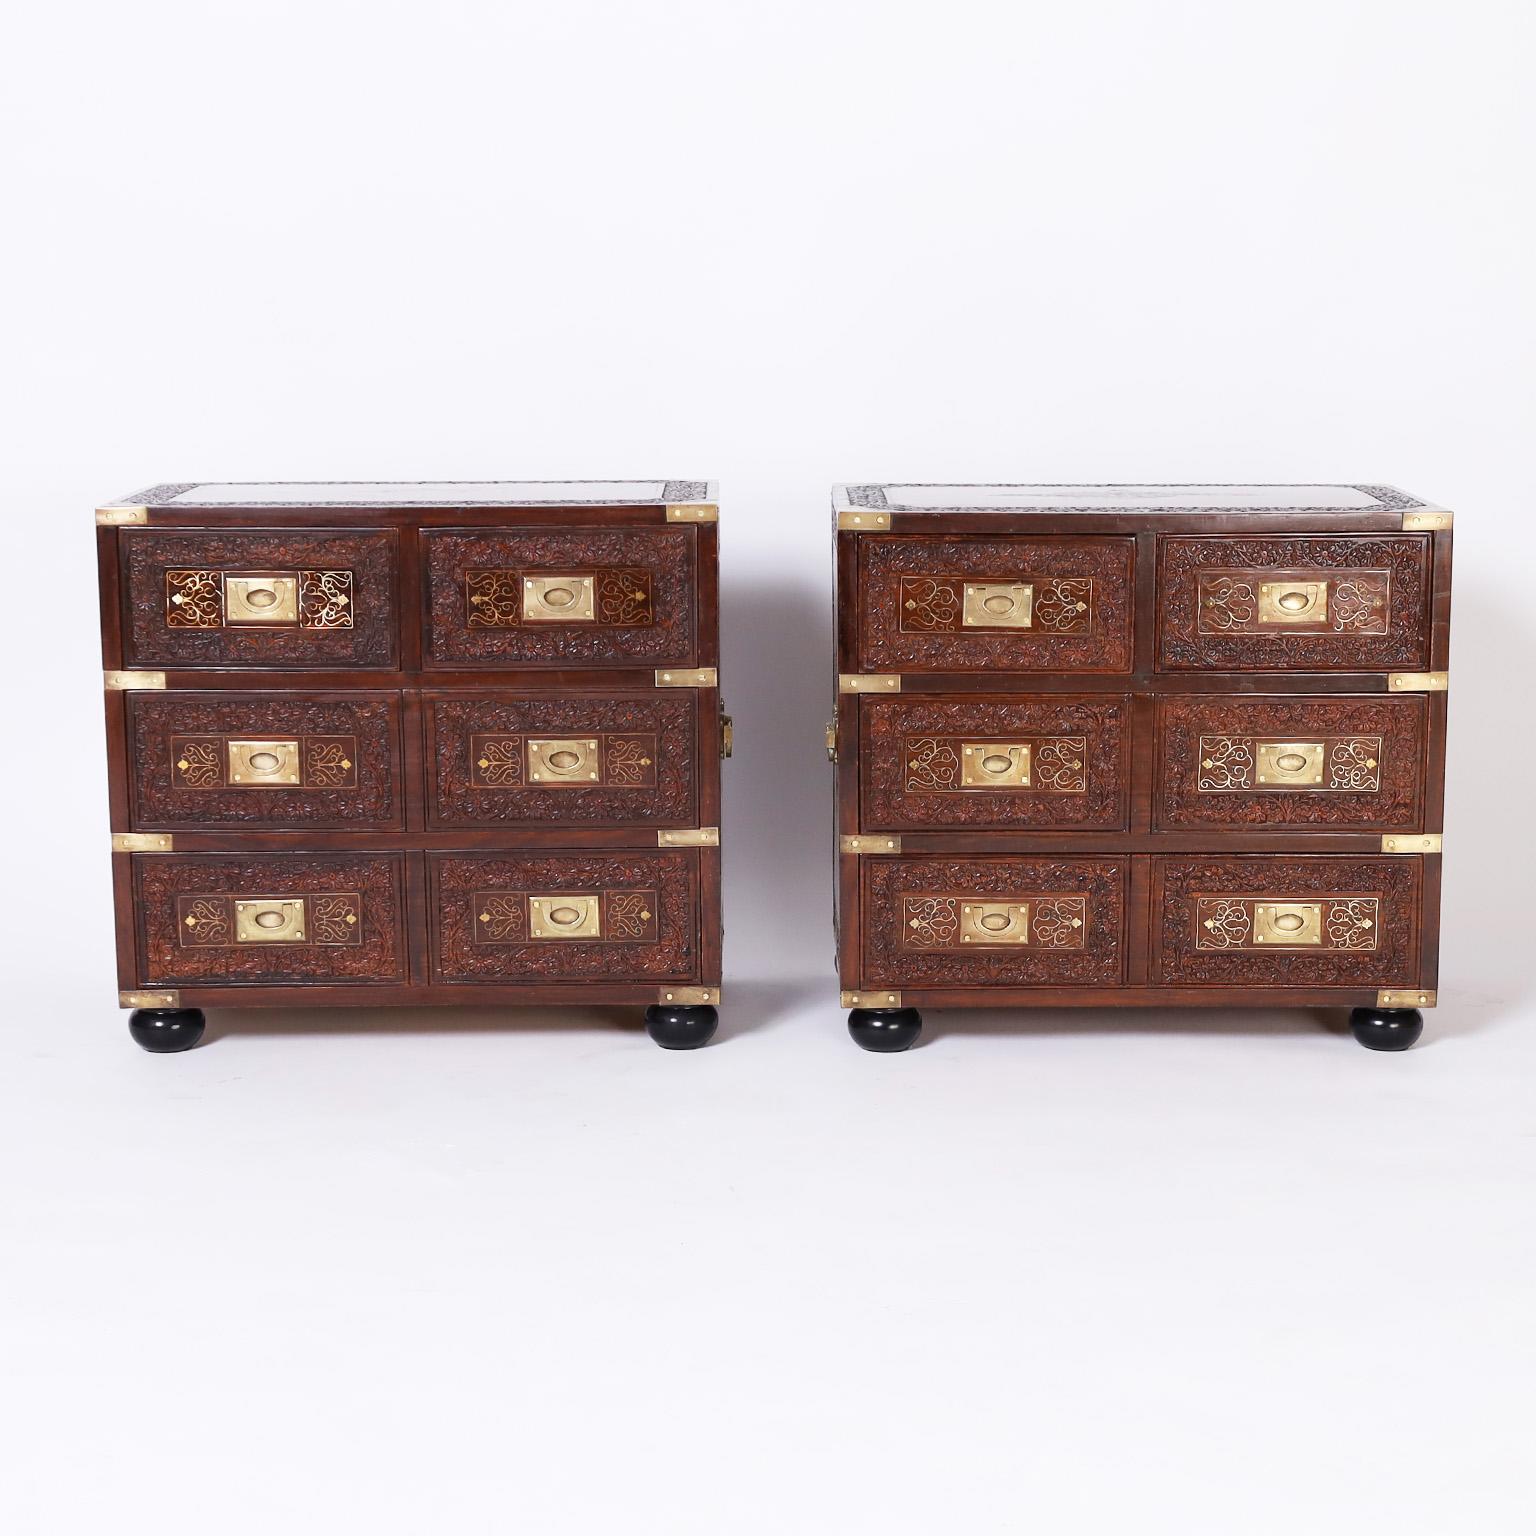 Pair of mid century Anglo Indian Campaign style six drawer stands crafted in rosewood with floral brass inlays all around, elaborate floral carvings, brass Campaign hardware, and ebonized feet.